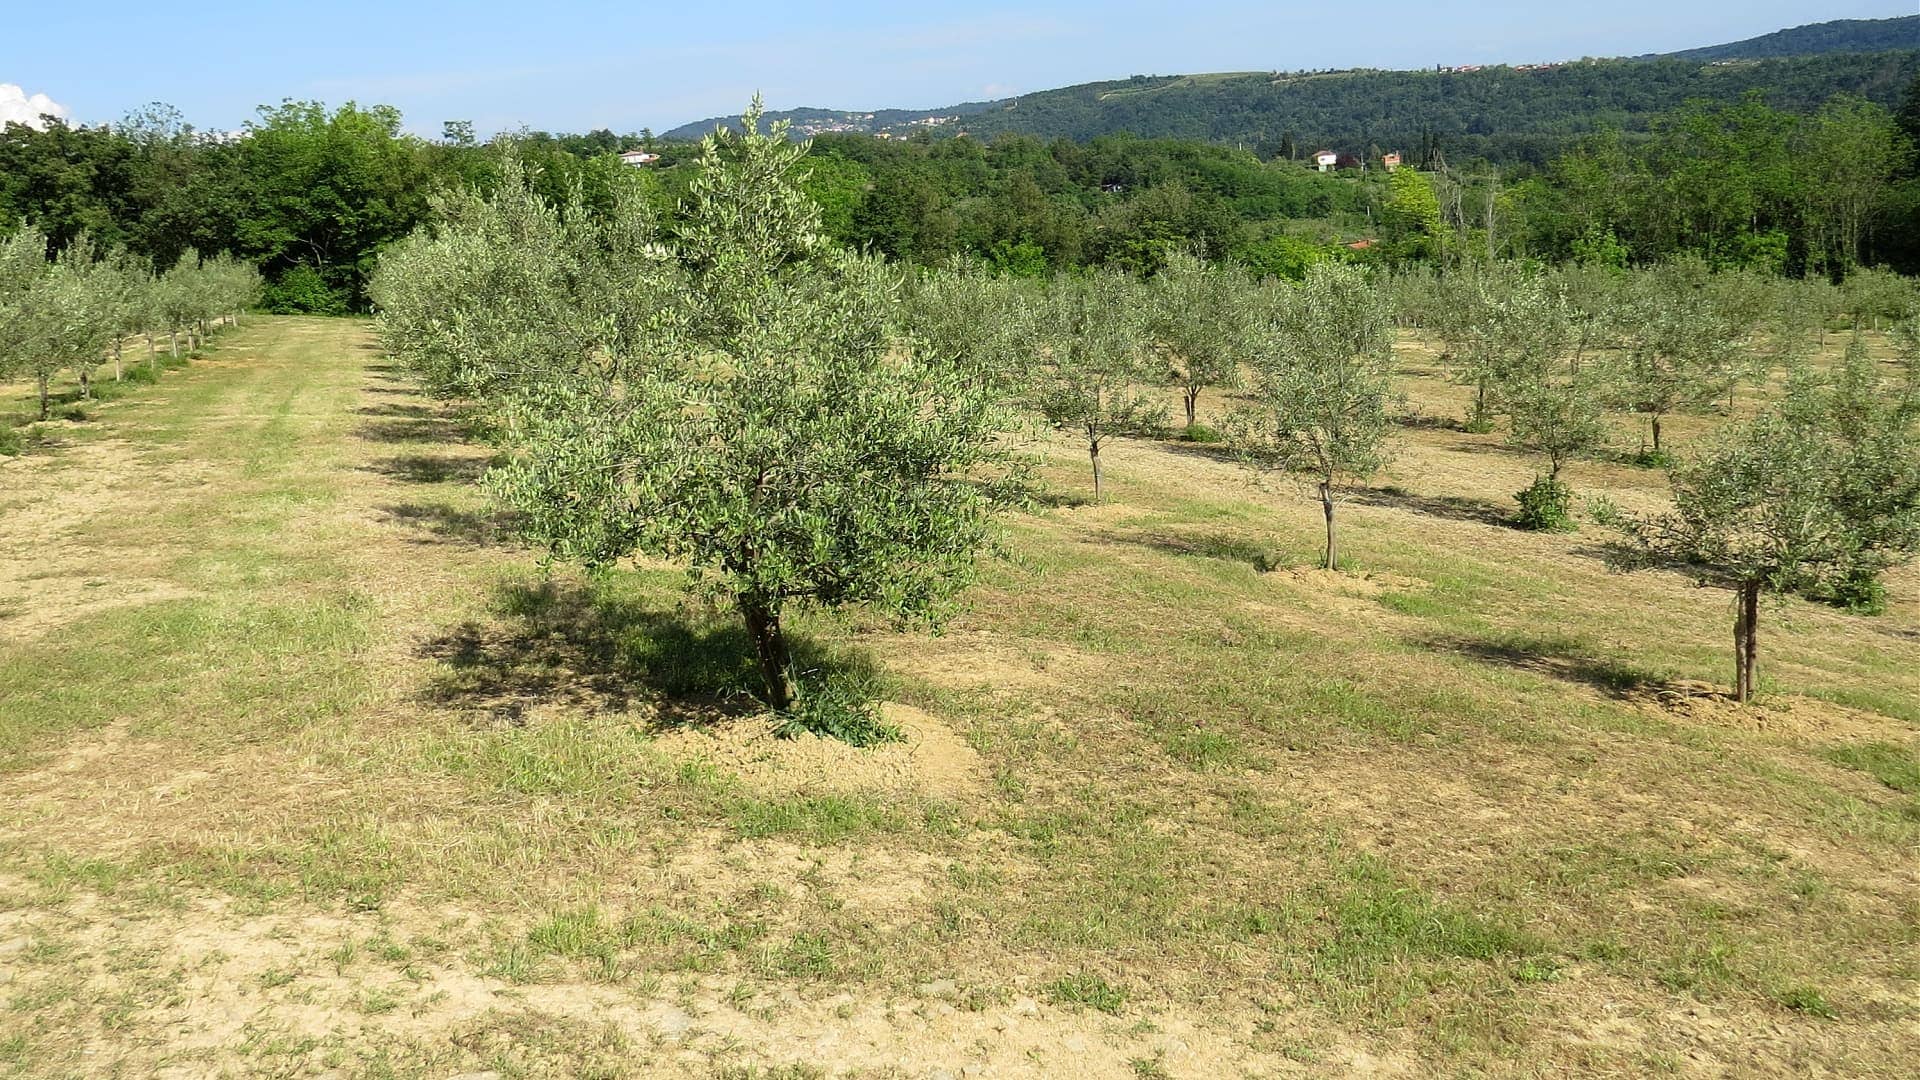 profiles-production-in-slovenia-a-fruitful-harvest-despite-drowt-pests-olive-oil-times